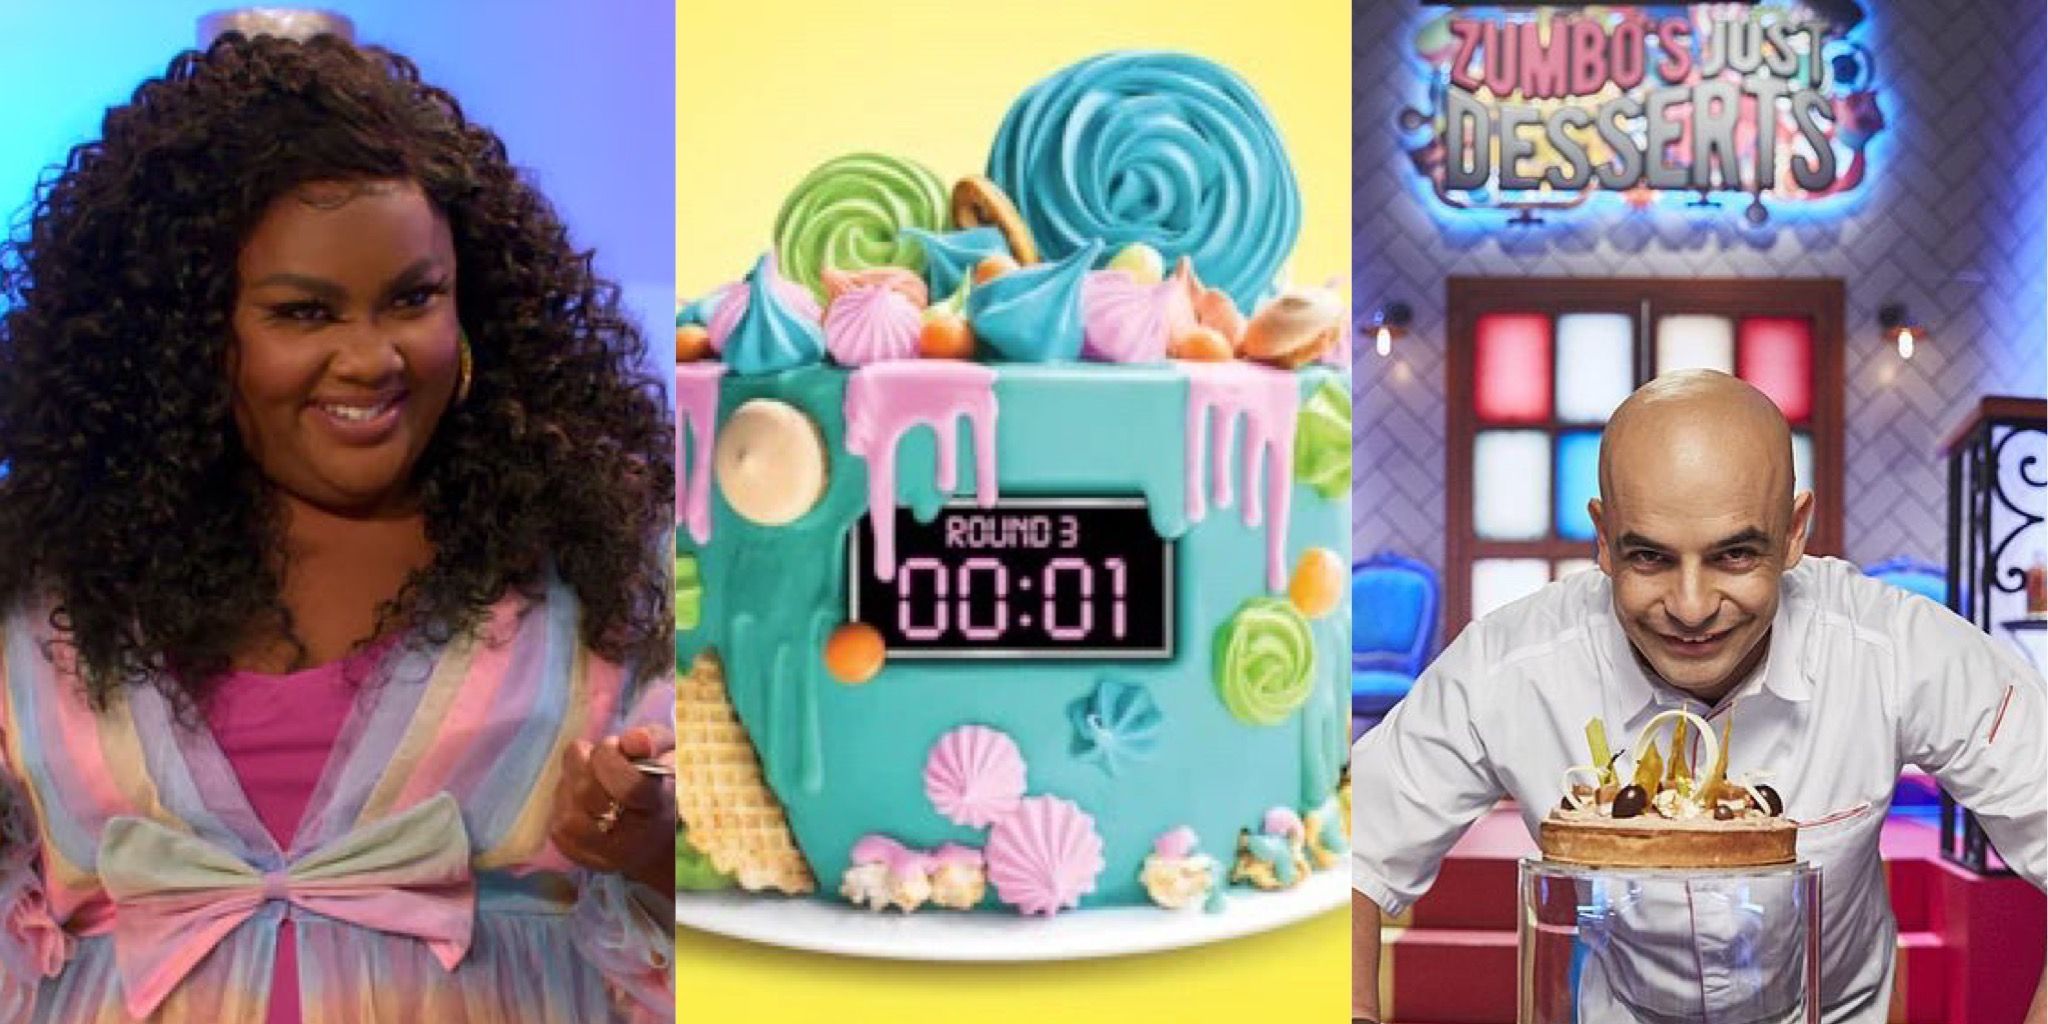 Stills from Nailed It!, Sugar Rush and Zumbo's Just Desserts